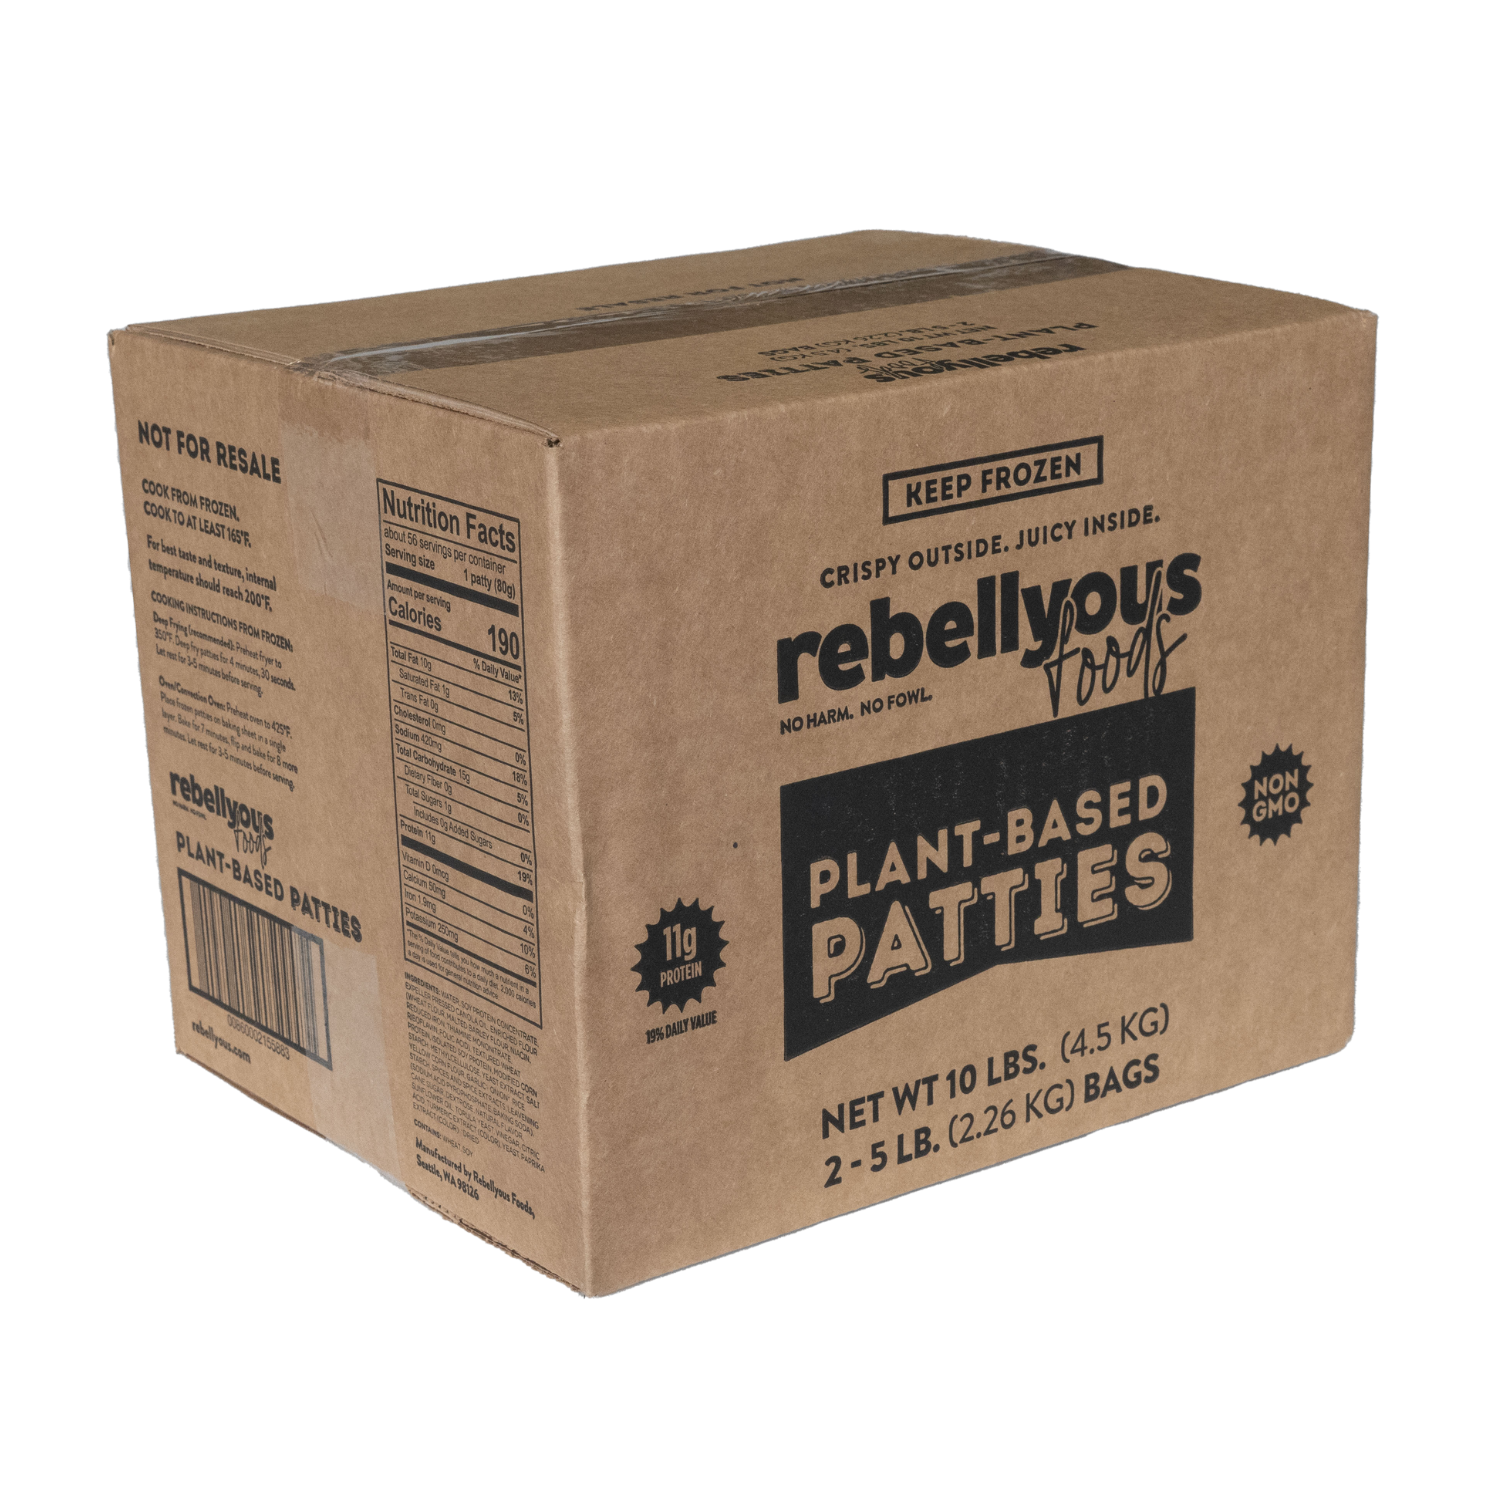 Rebellyous Tenders  (Soy + Wheat) Food Service  1 units per case 10.0 lbs